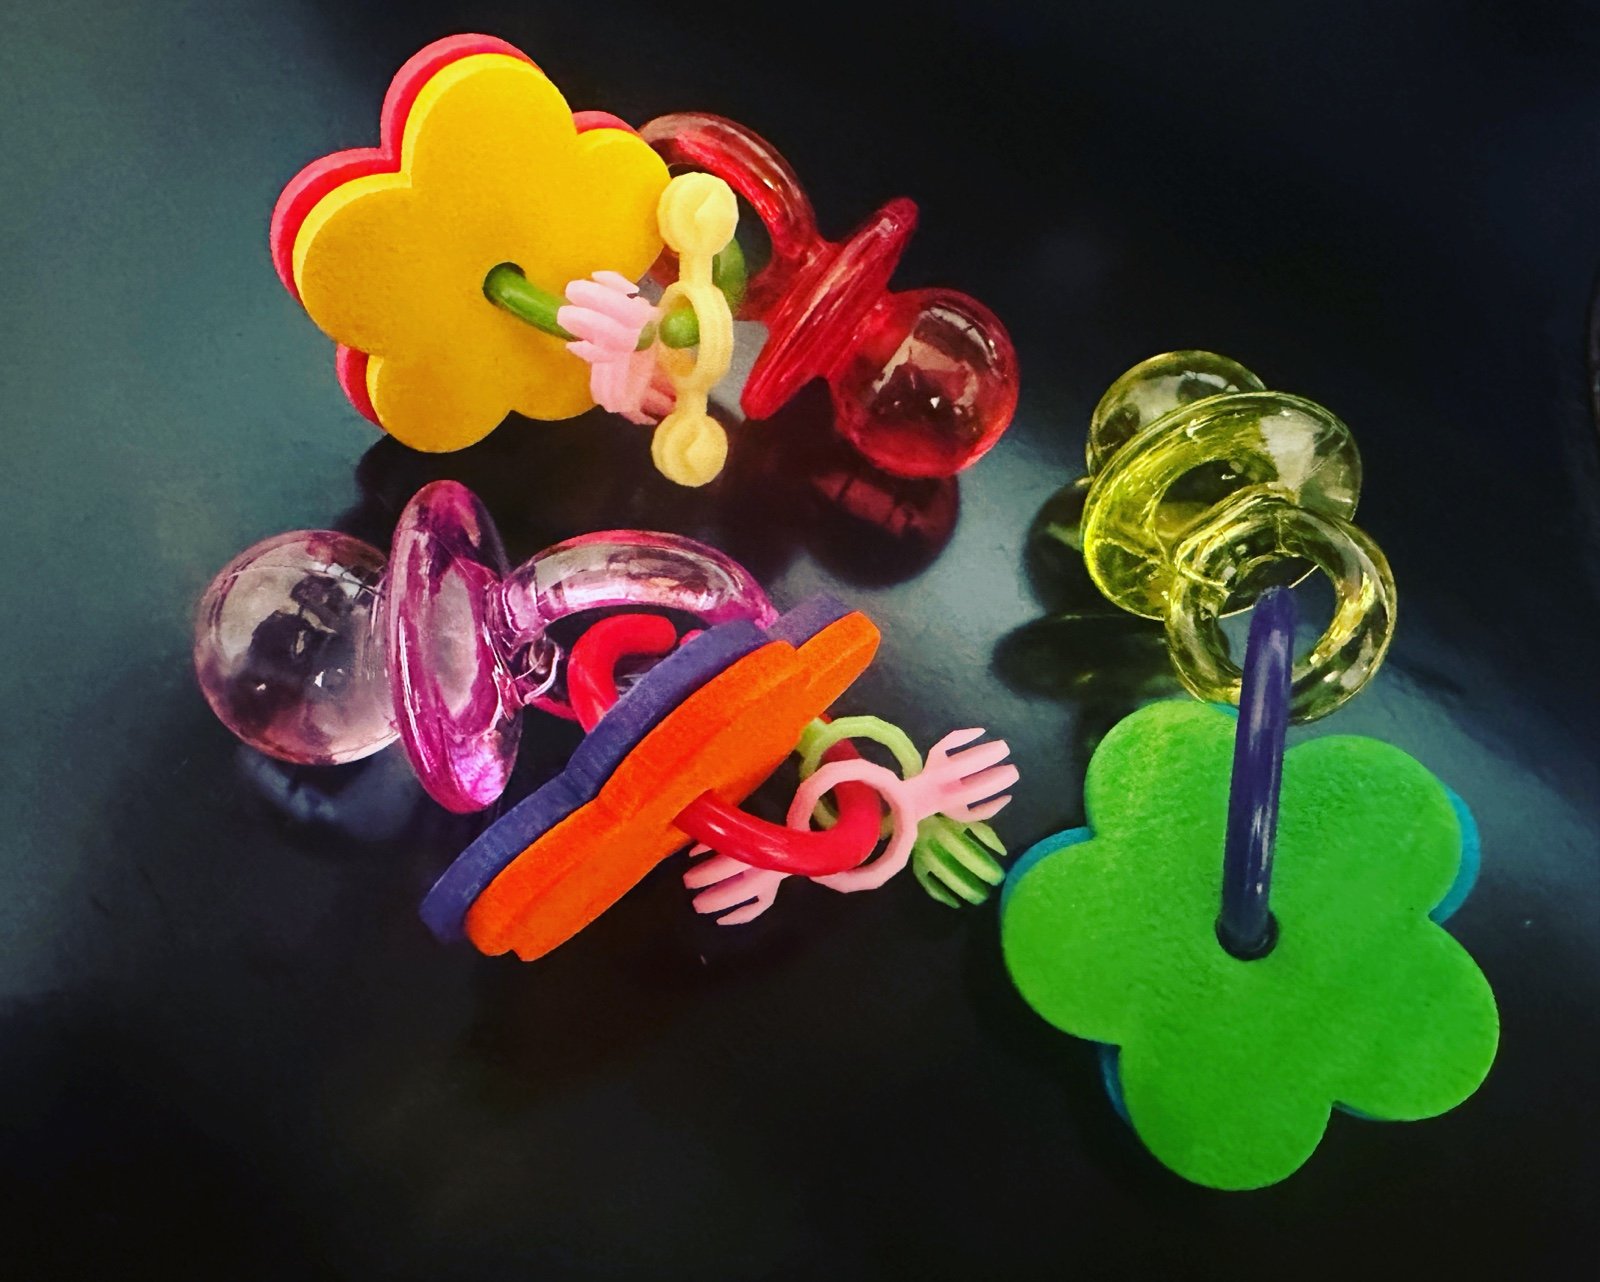 Pacifier Foot Toys 7fKUBBfSA